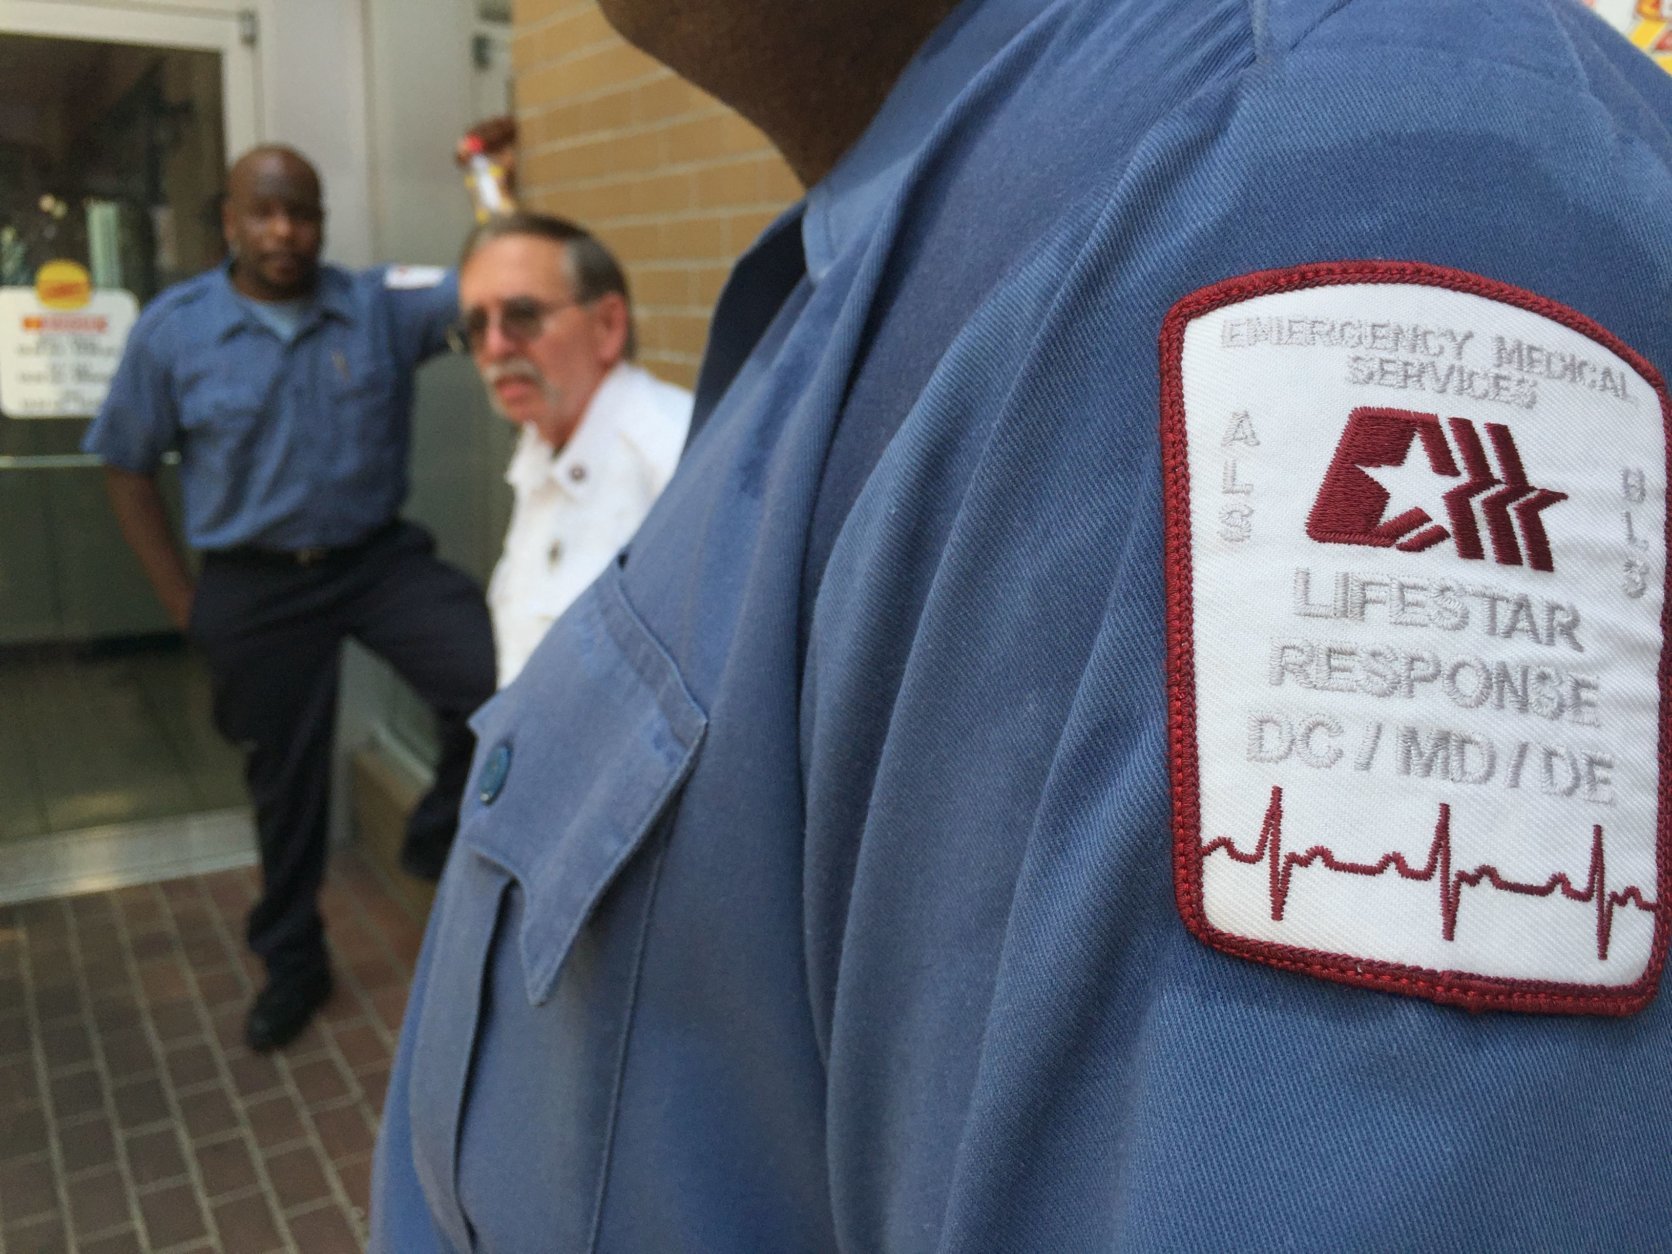 Medics stand by — just in case. (WTOP/Kristi King)